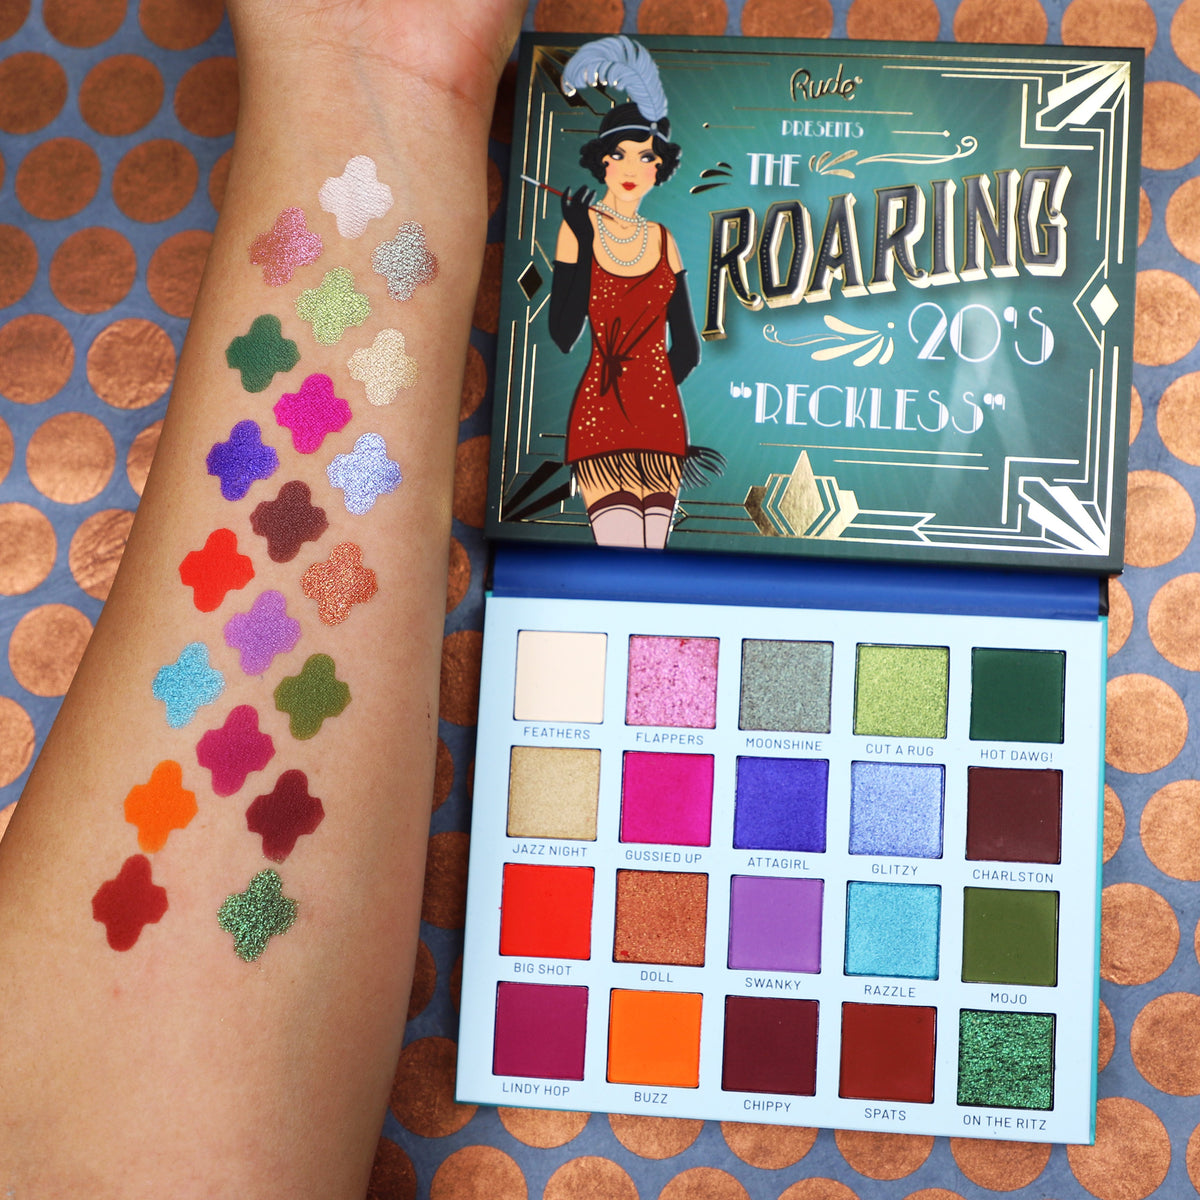 The Roaring 20's Eyeshadow Palette - Reckless Swatch